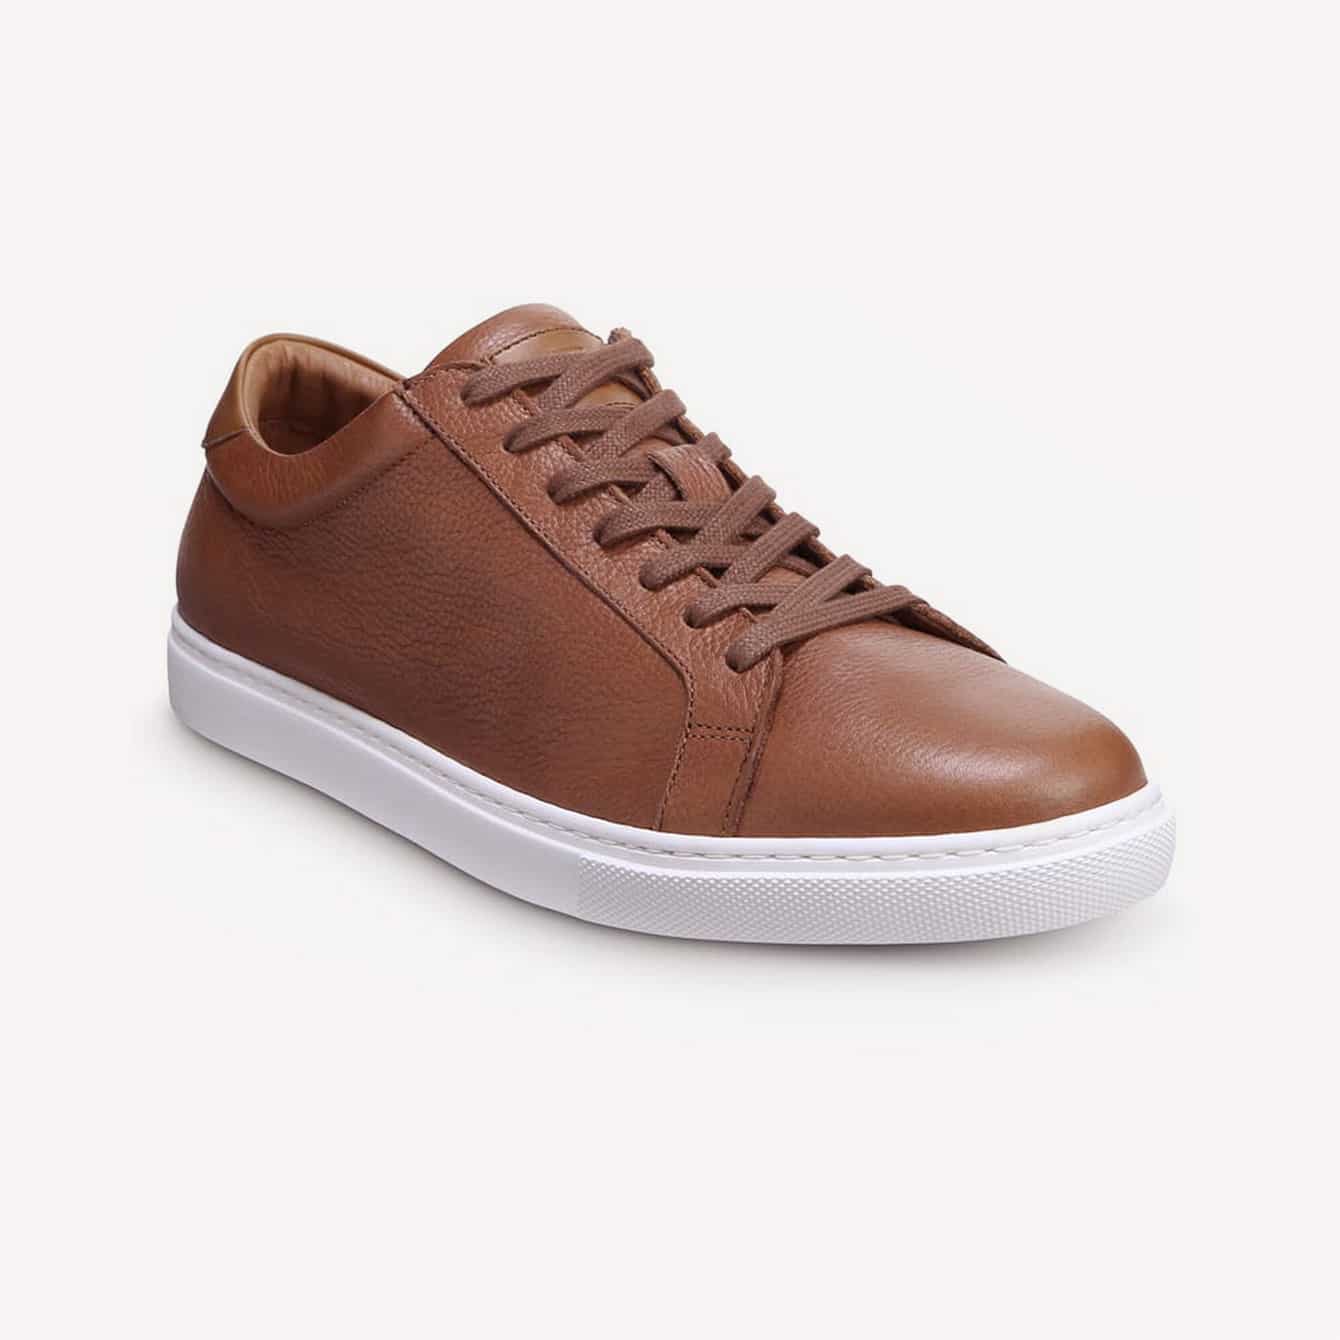 8 Best Brown Leather Sneakers for Men in 2021 The Modest Man